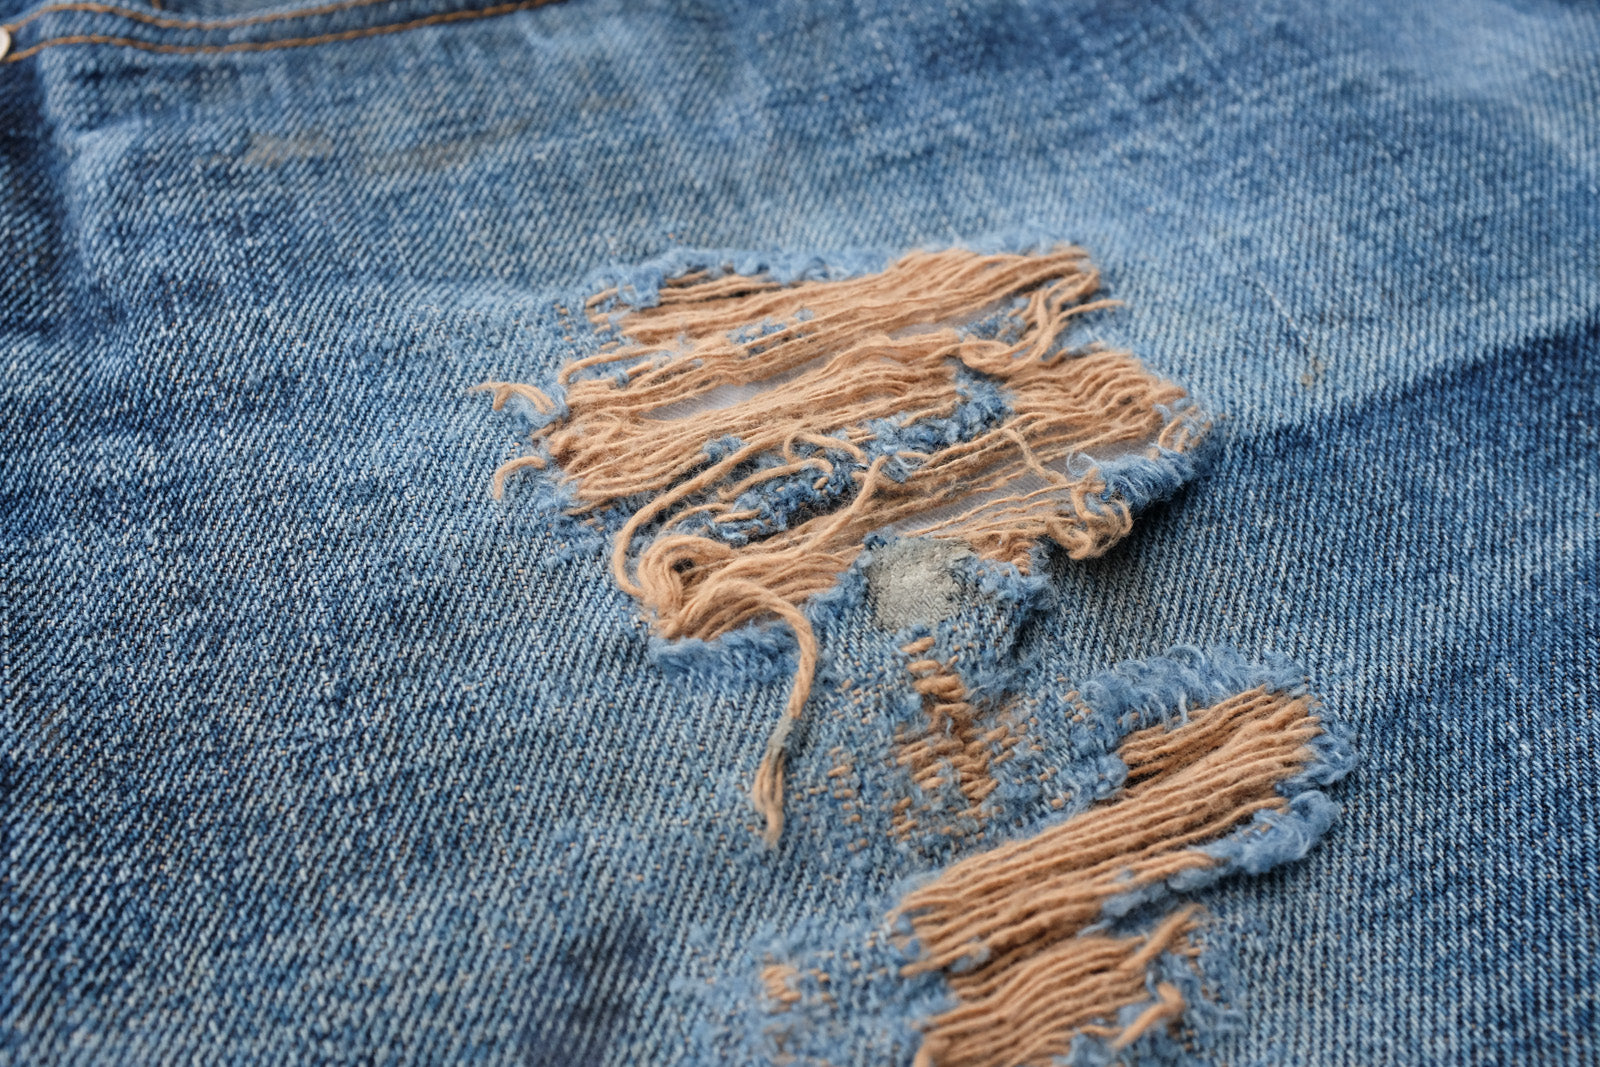 Detail shot of the front of the pair of jeans showcasing the brown weft fabric peeking through in areas that the indigo warp fabric has worn down.